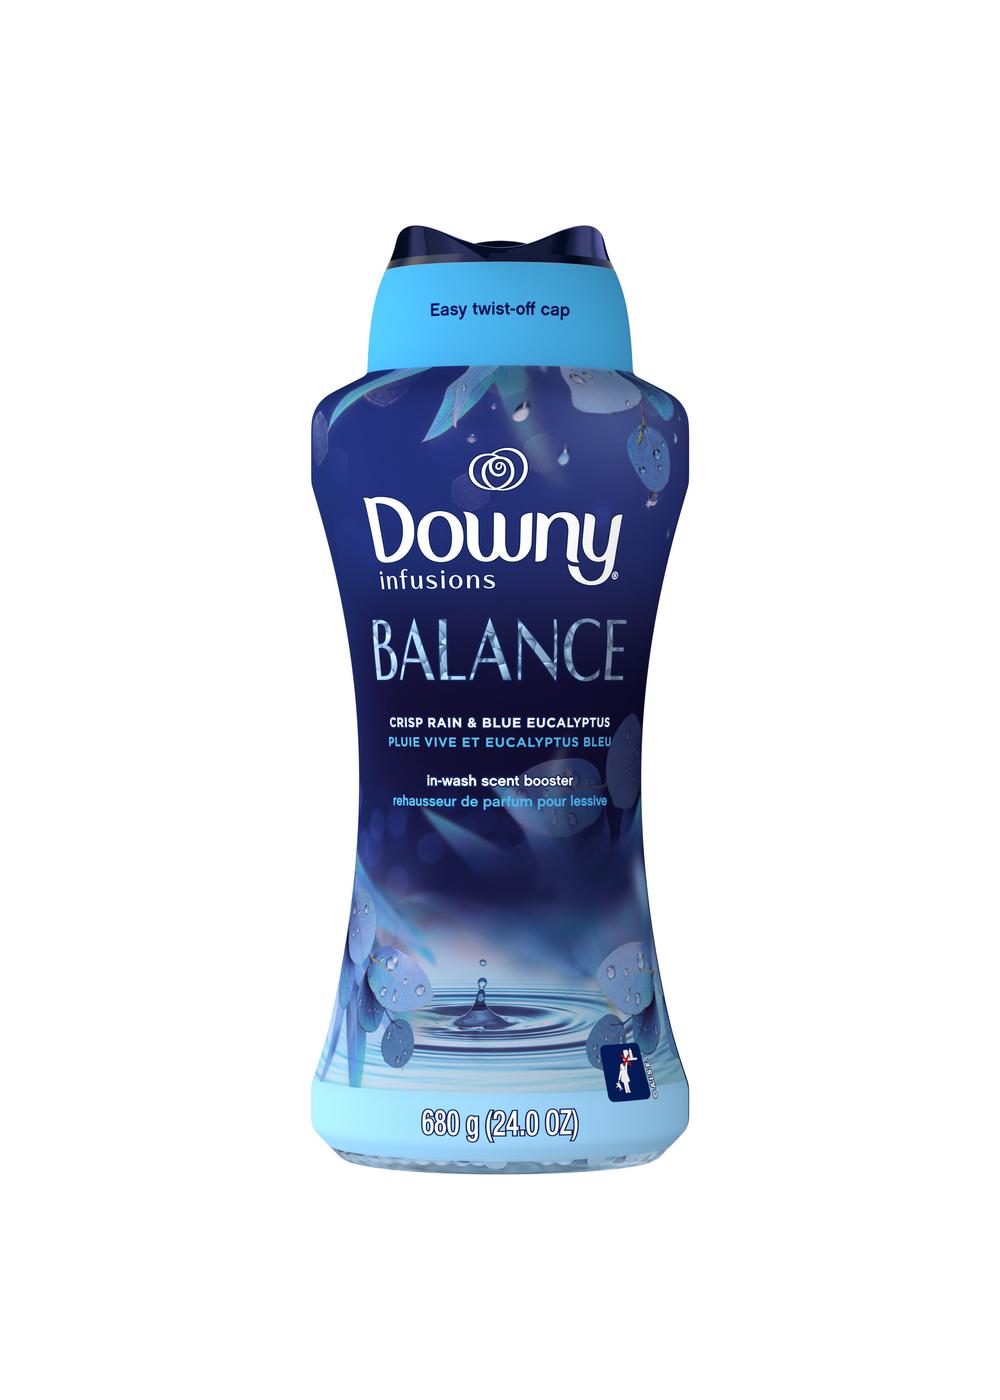 Downy Infusions Balance In-Wash Scent Booster Beads - Crisp Rain & Blue Eucalyptus; image 1 of 2